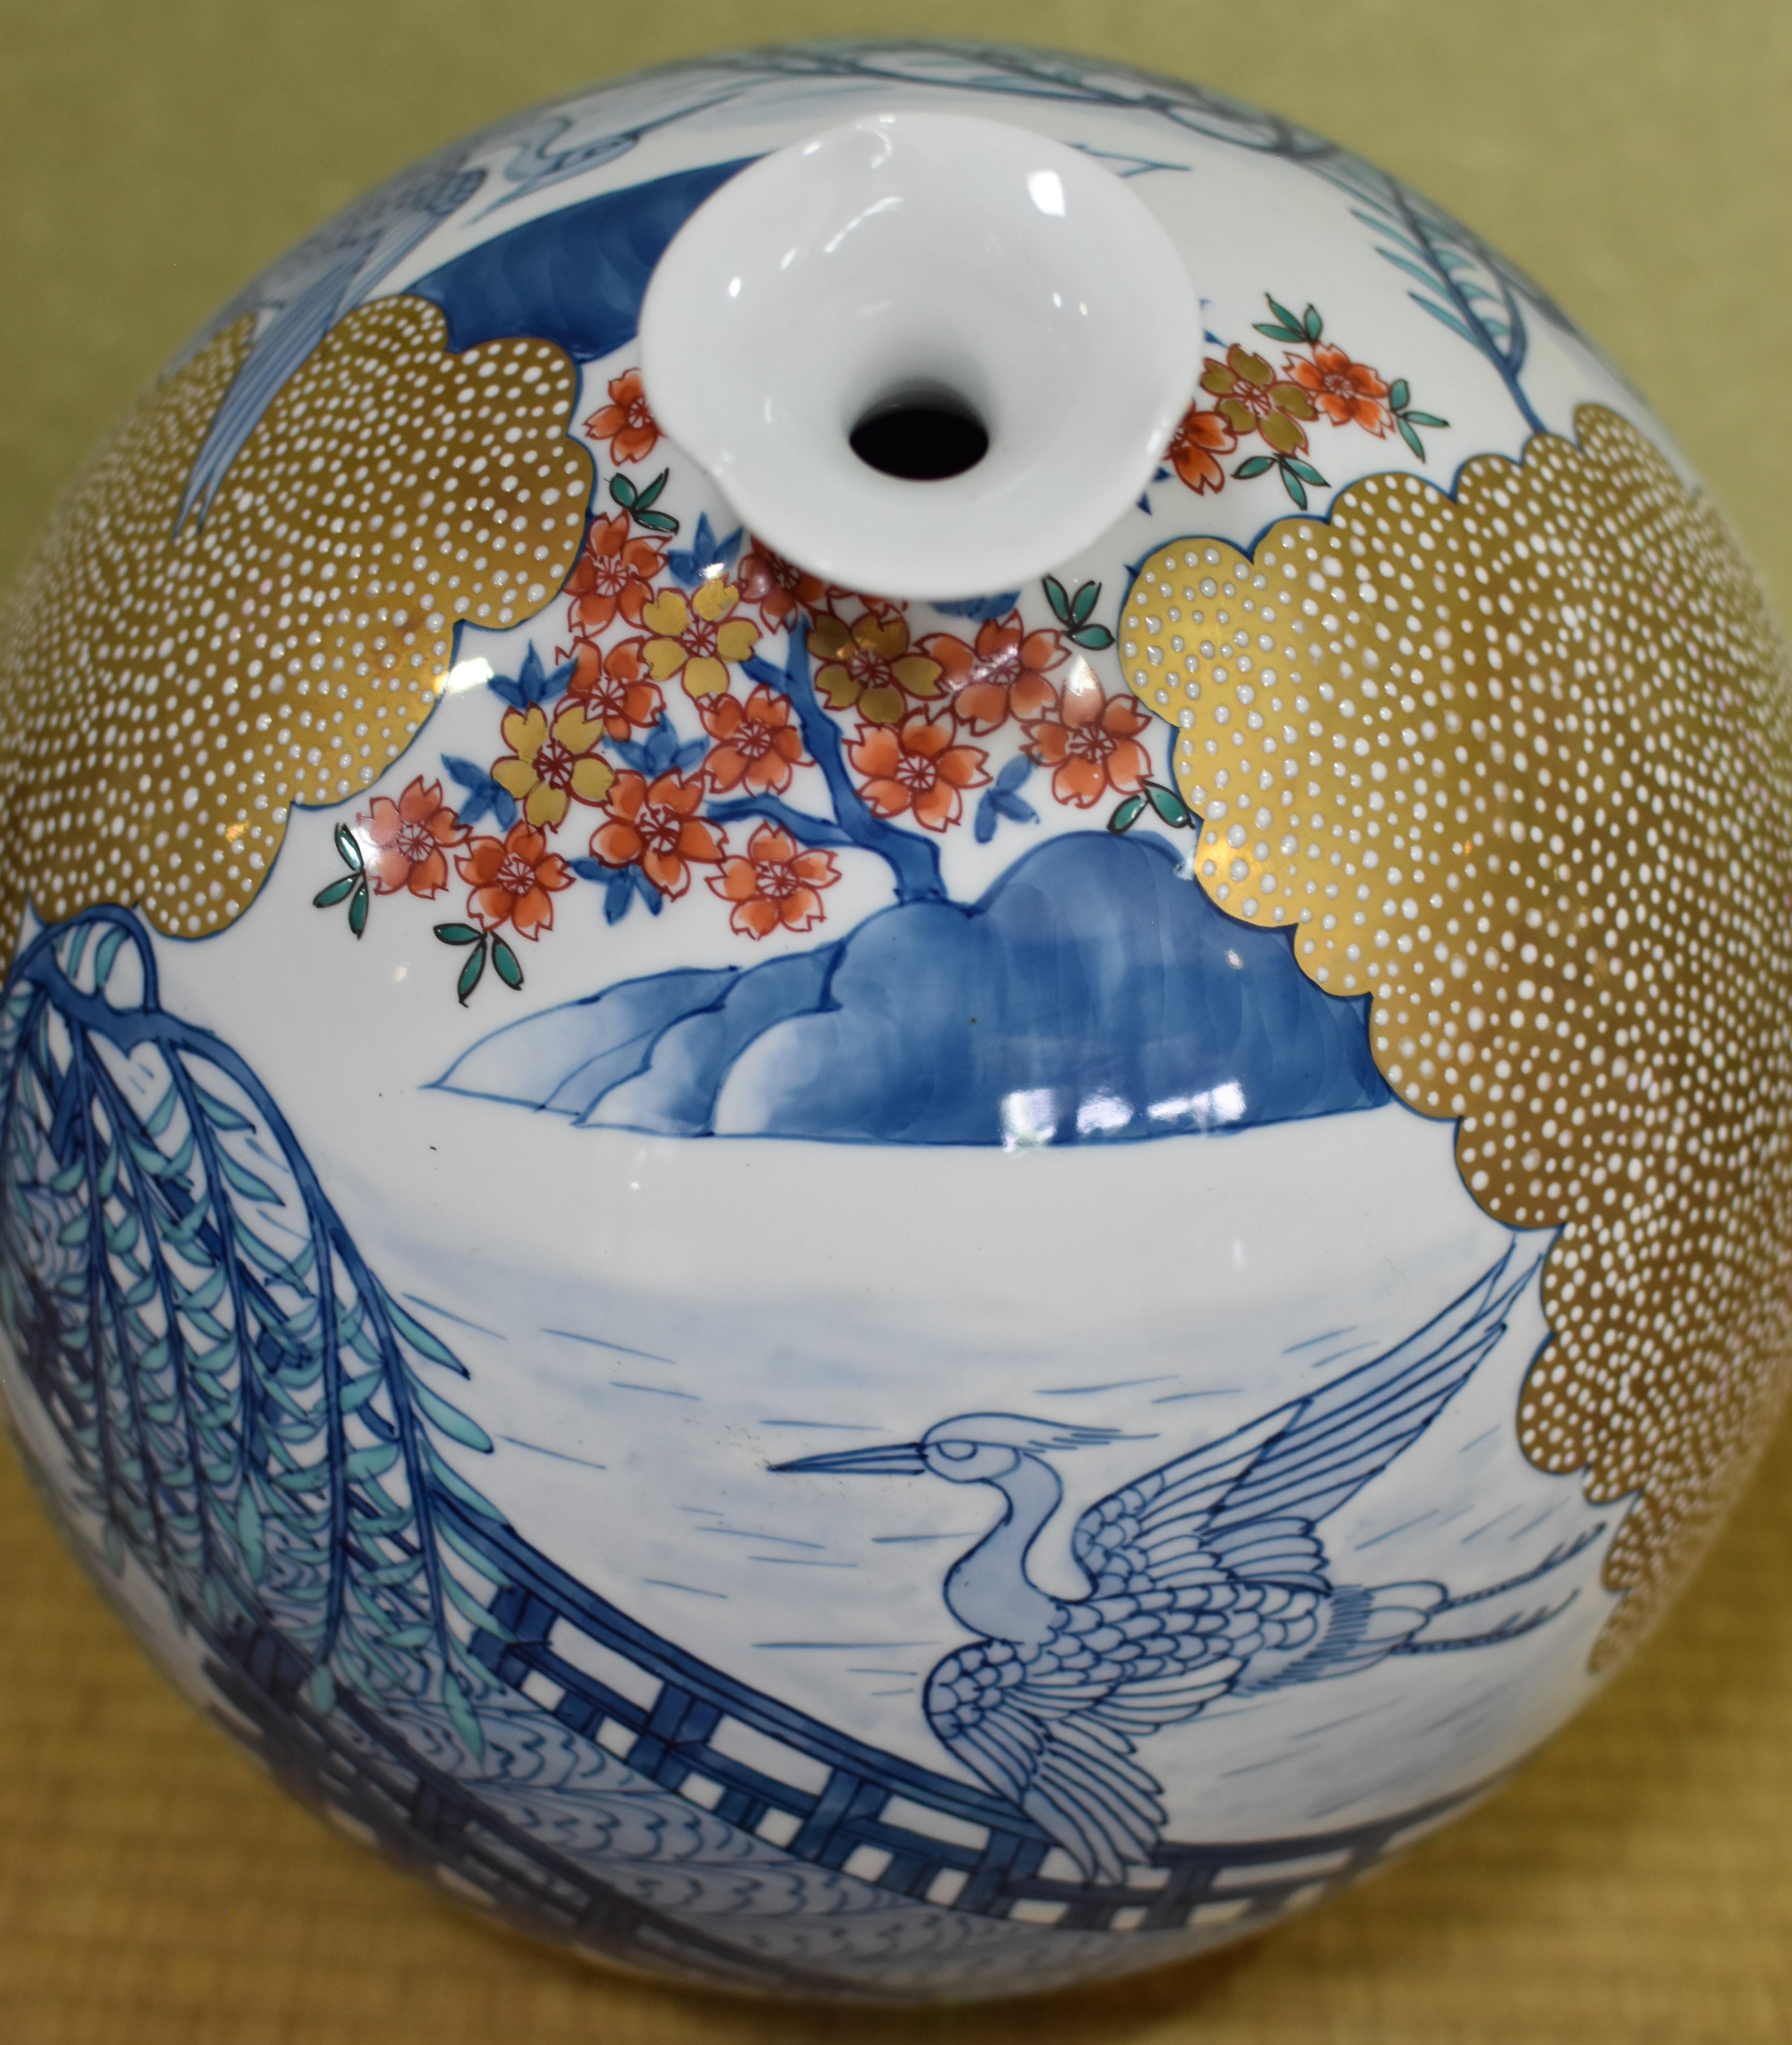 Exceptional Japanese contemporary large decorative porcelain vase, gilded and hand-painted in beautiful shades of blue on an attractive ovoid shape porcelain body, featuring a stunning combination of blue underglaze, polychrome overglaze and